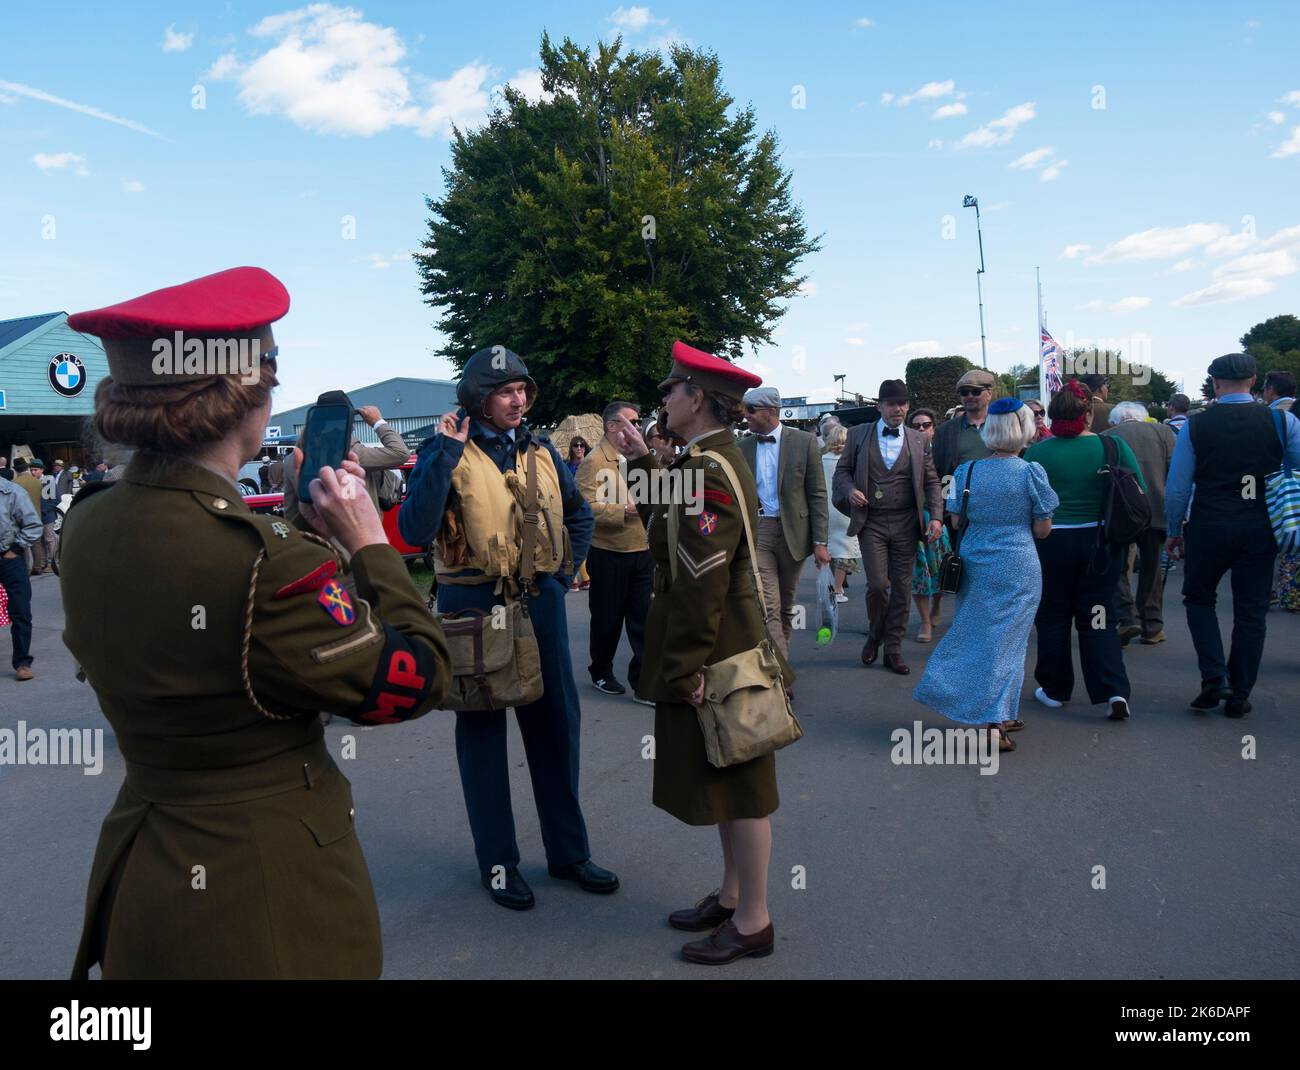 Two women dressed in ATS uniform, one taking a photo of the other next to a man in WW2 RAF uniform, Revival Meeting, Goodwood motor racing circuit, UK Stock Photo